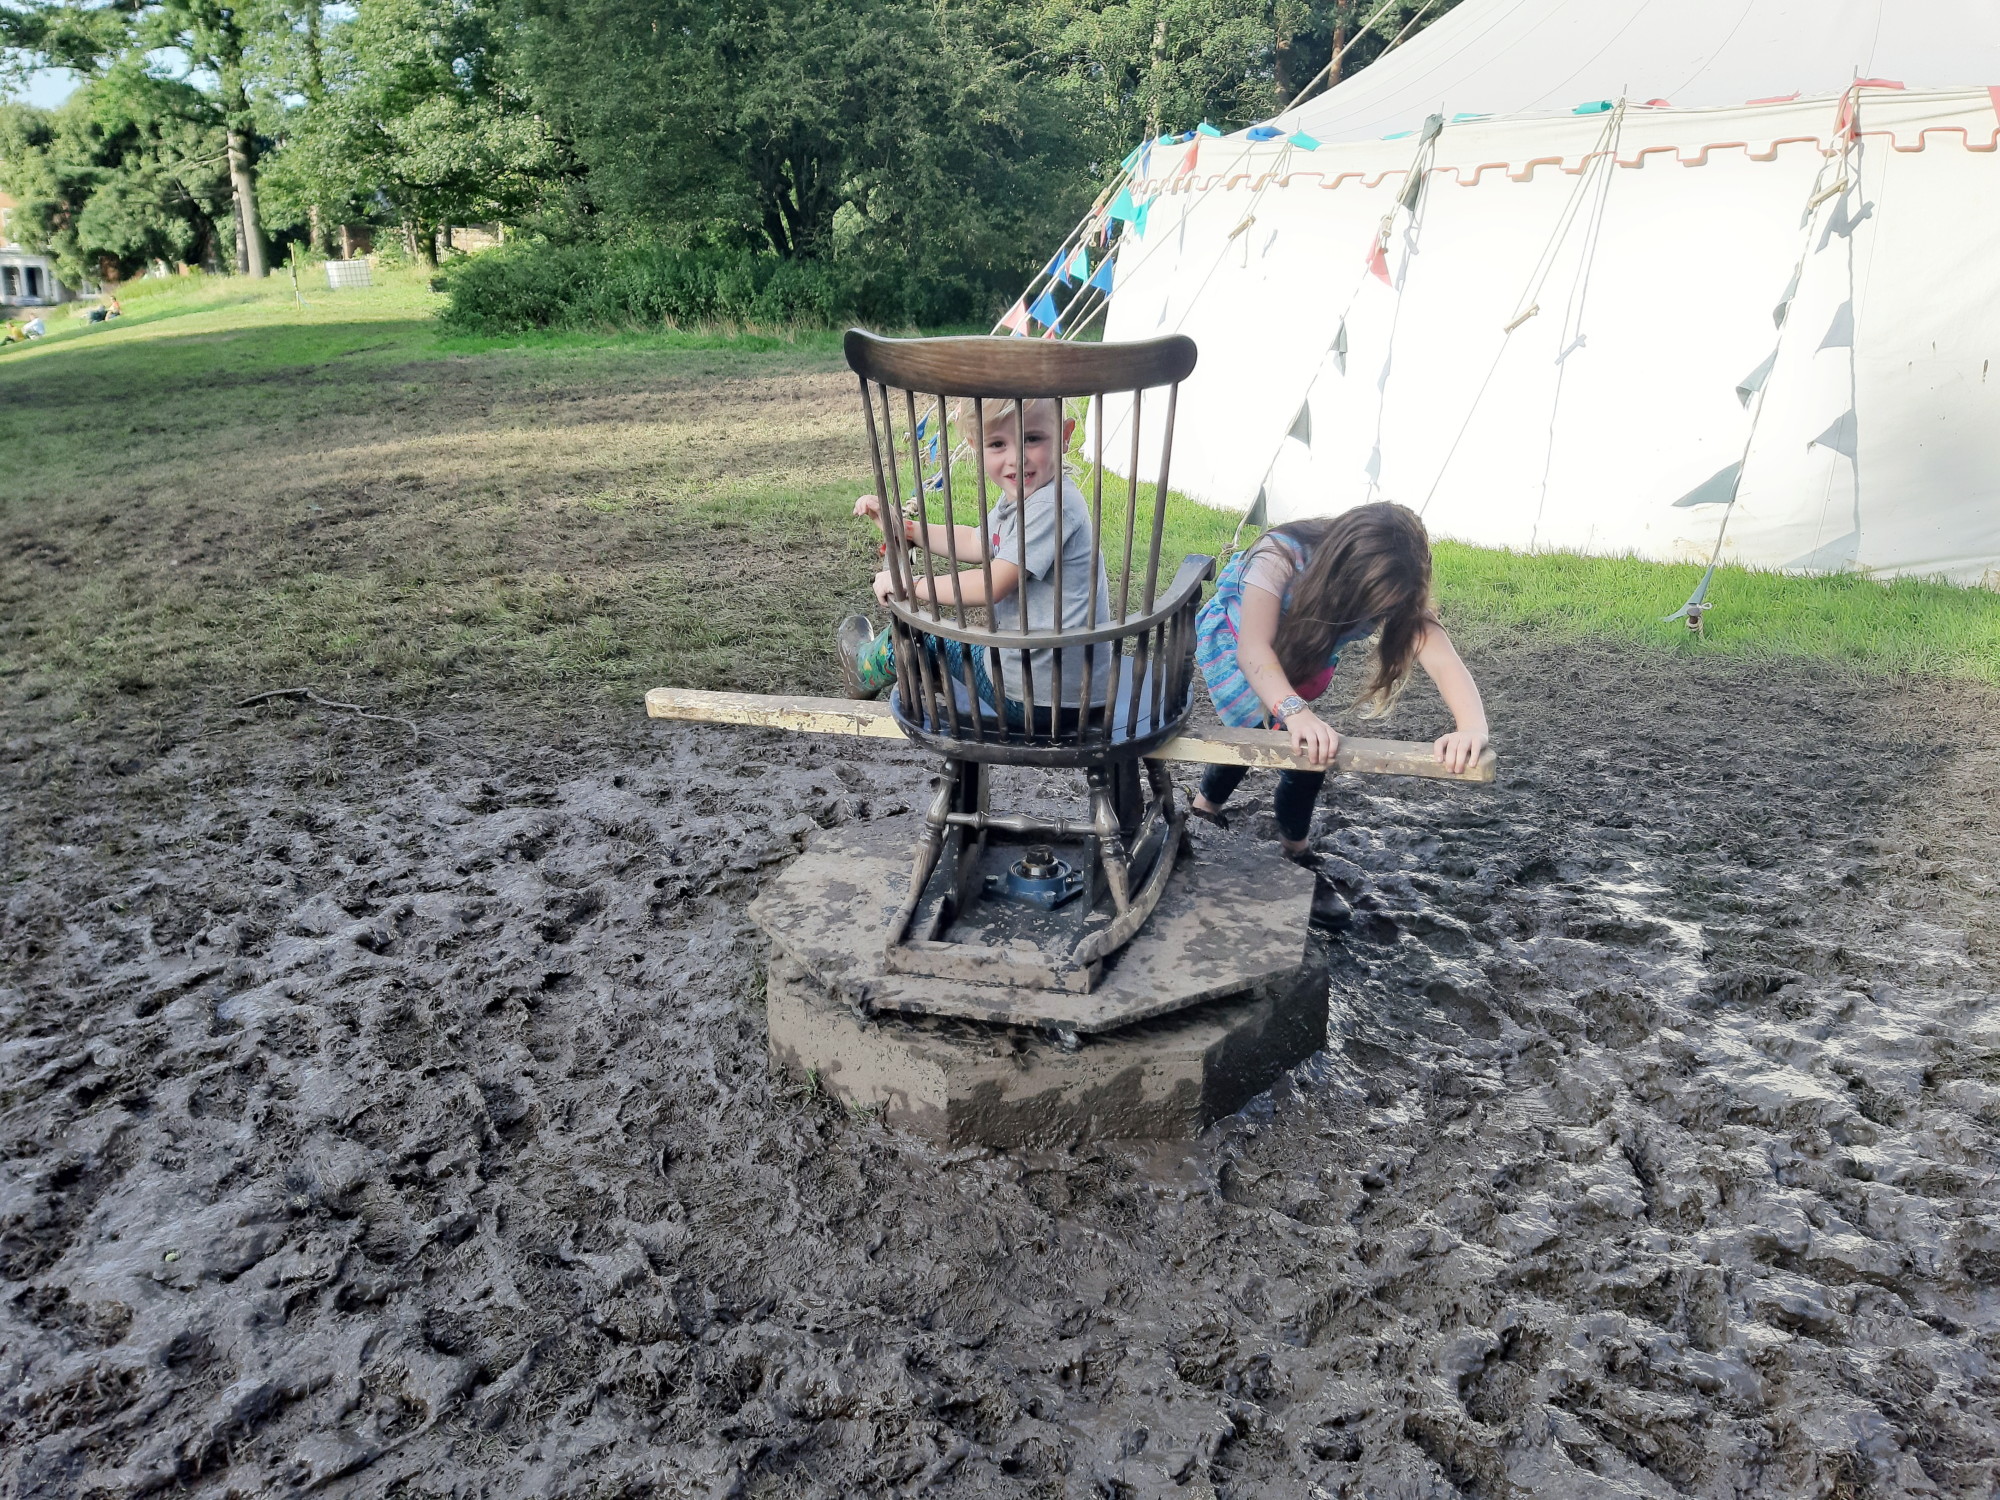 A magical, muddy weekend at the Just So Festival